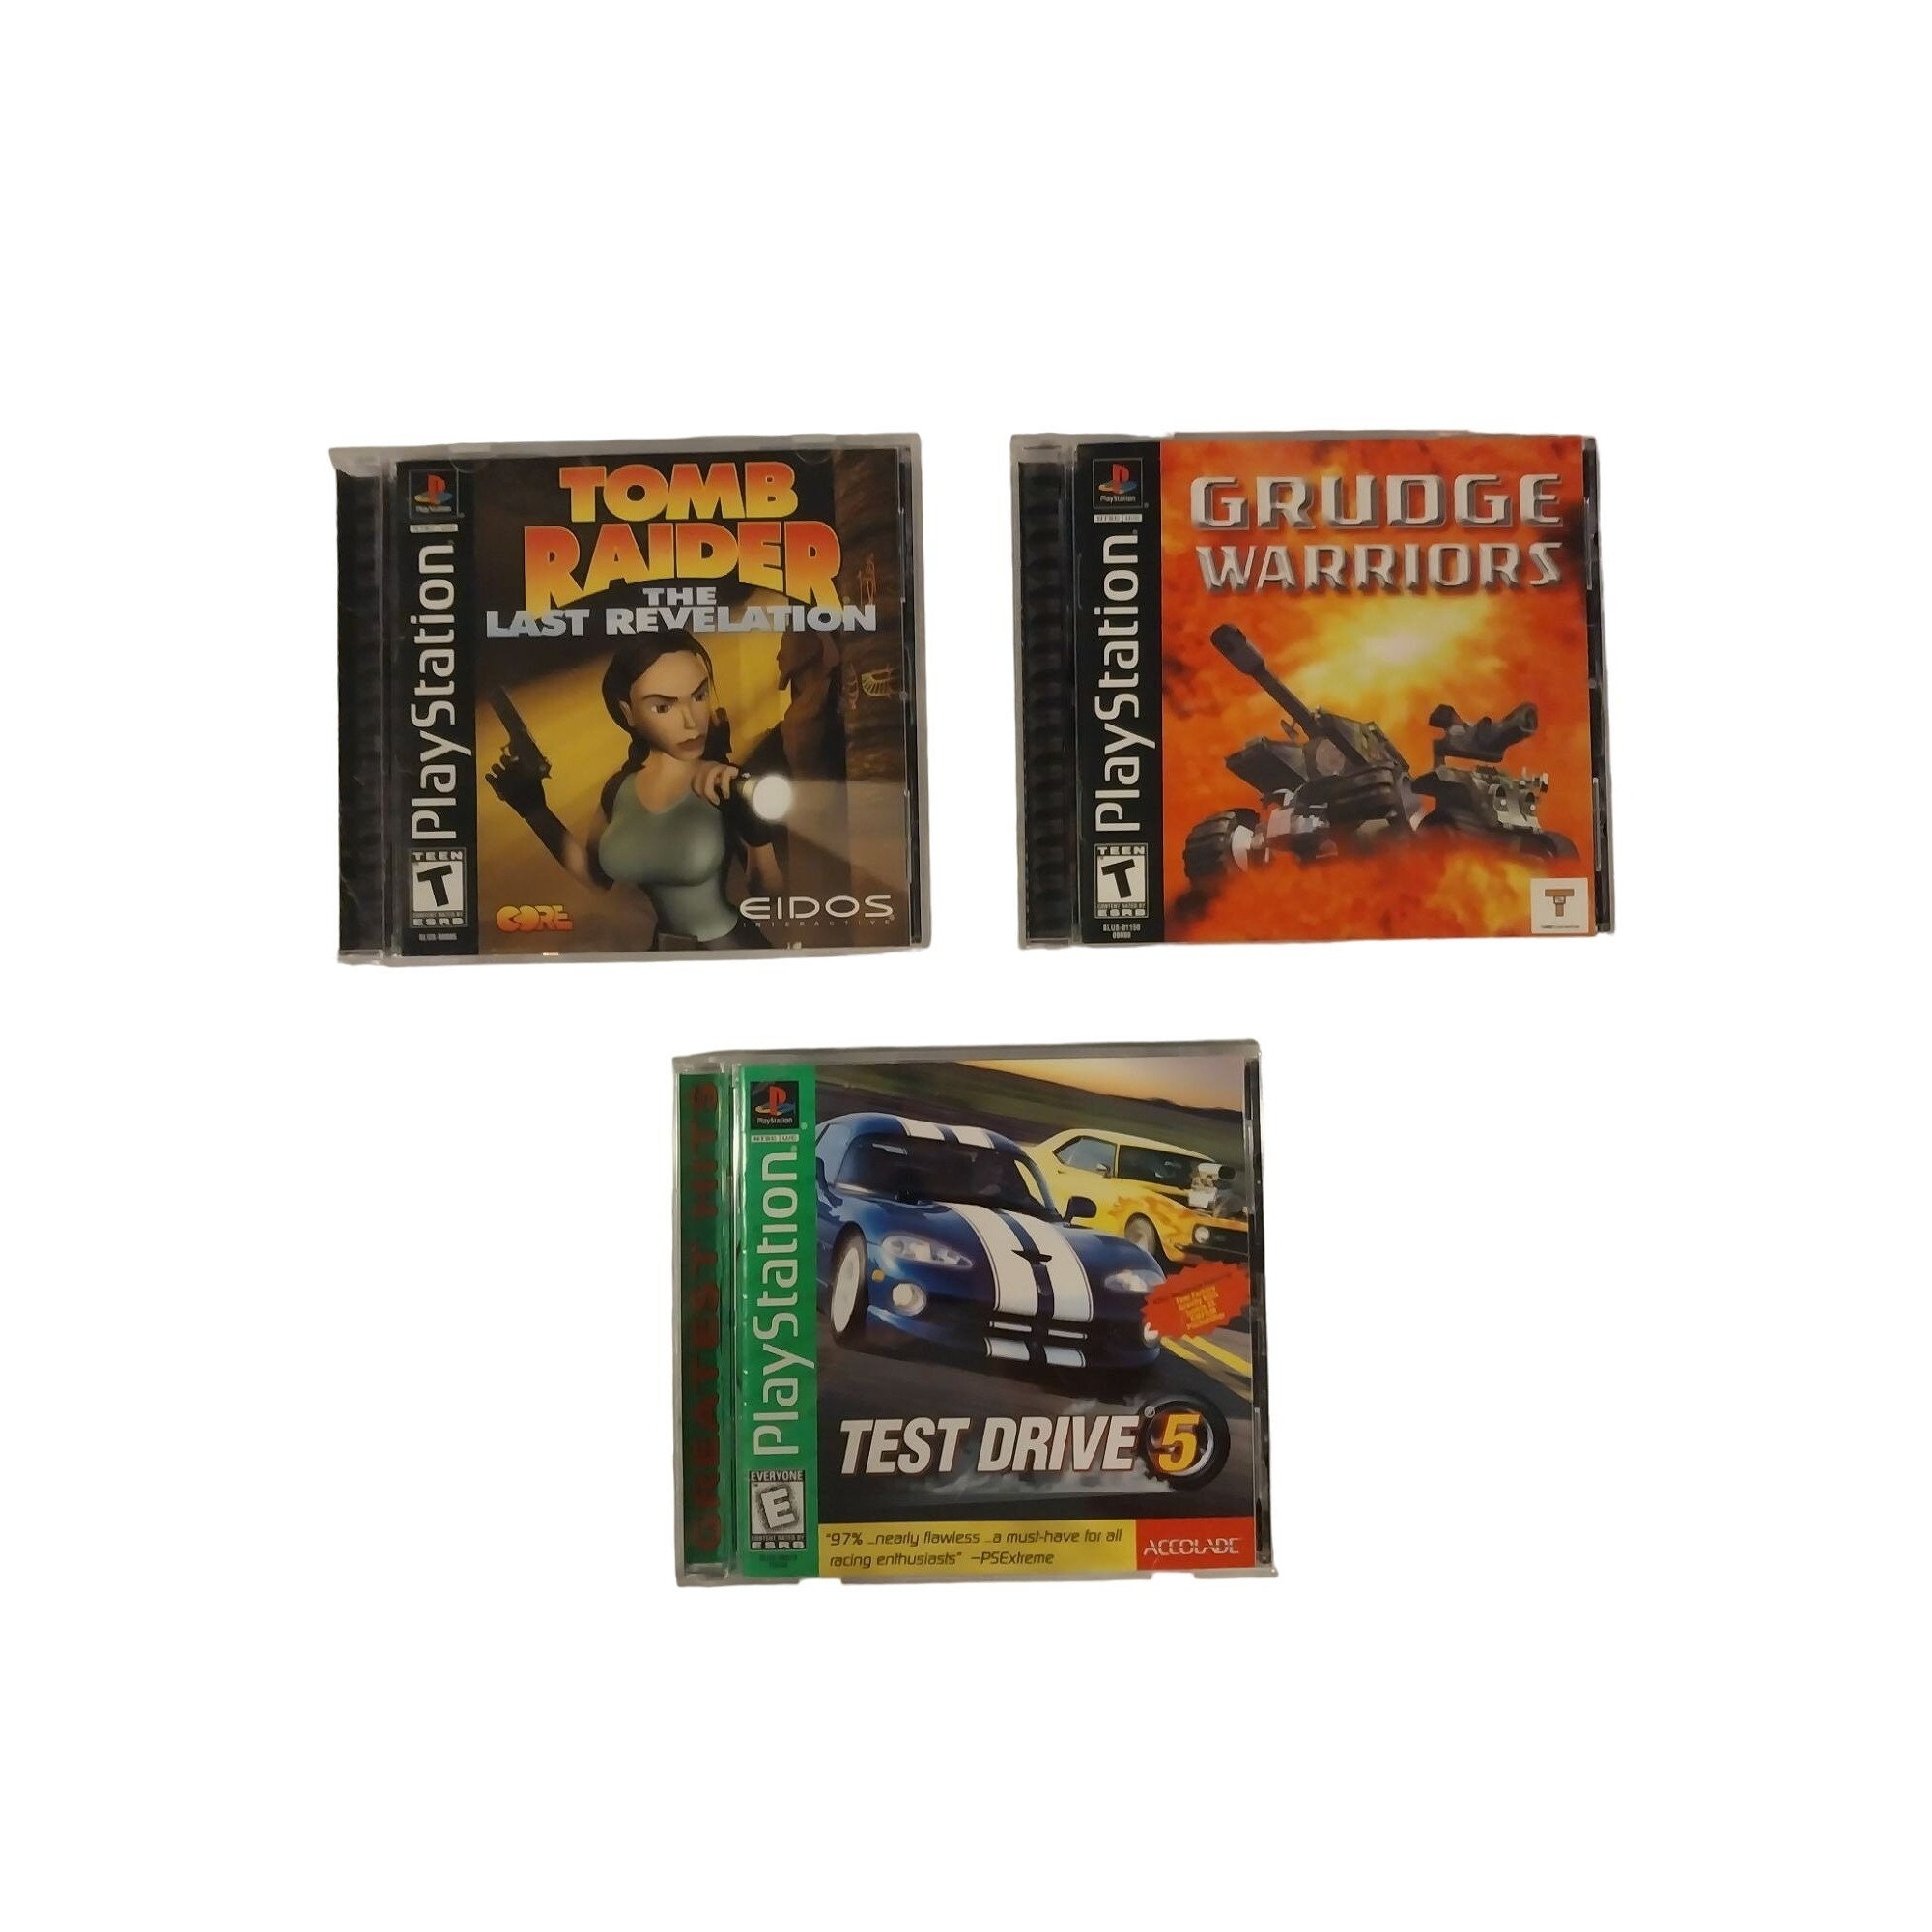 Grudge Warriors Playstation 1 PS1 Game For Sale